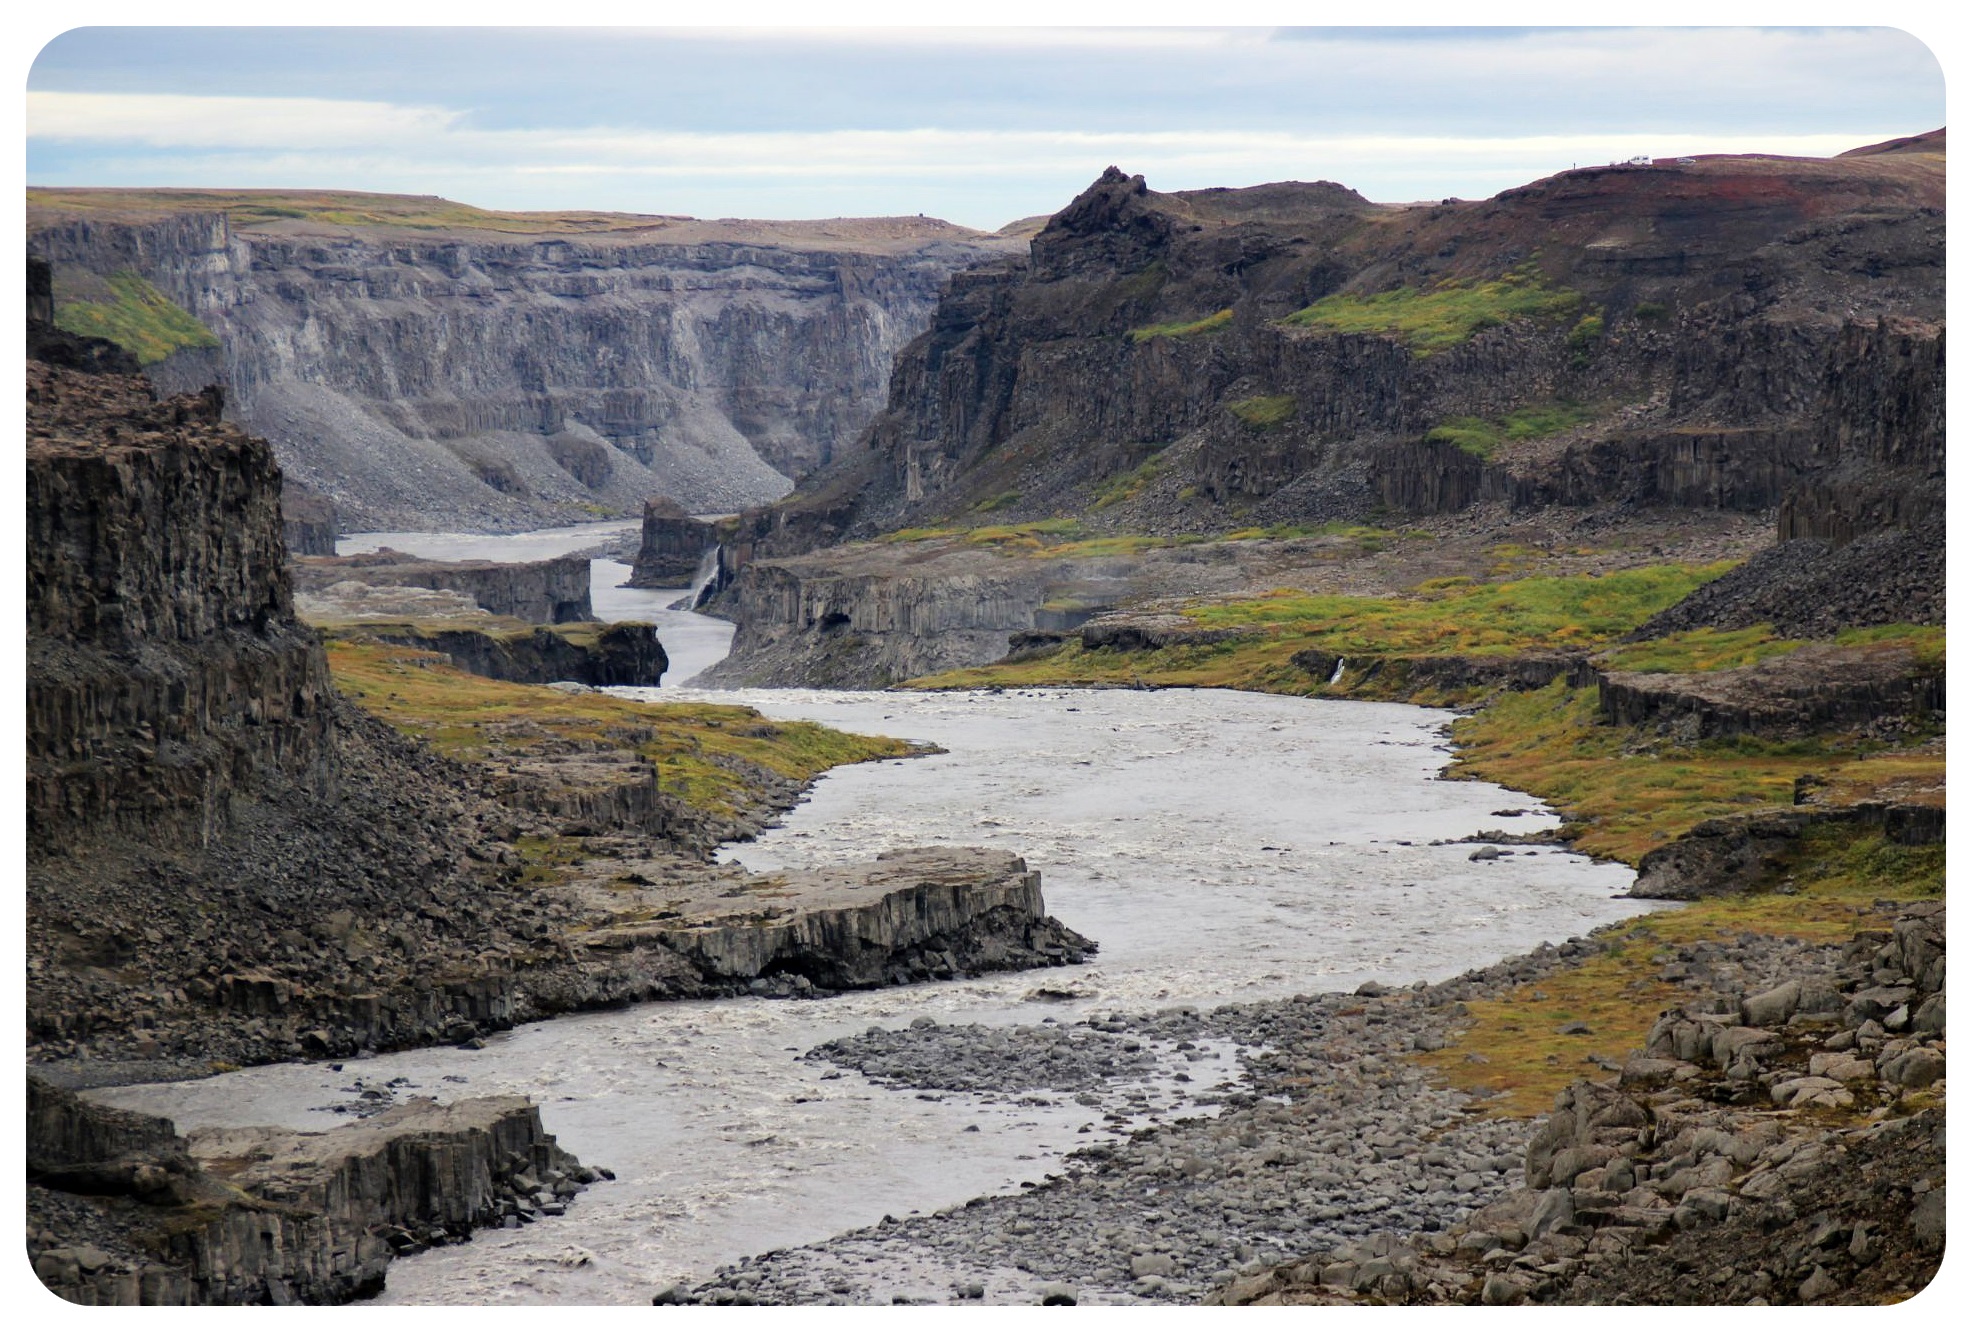 Icebergs, Waterfalls, Geysers & Lava Fields: Highlights From an Iceland Road Trip